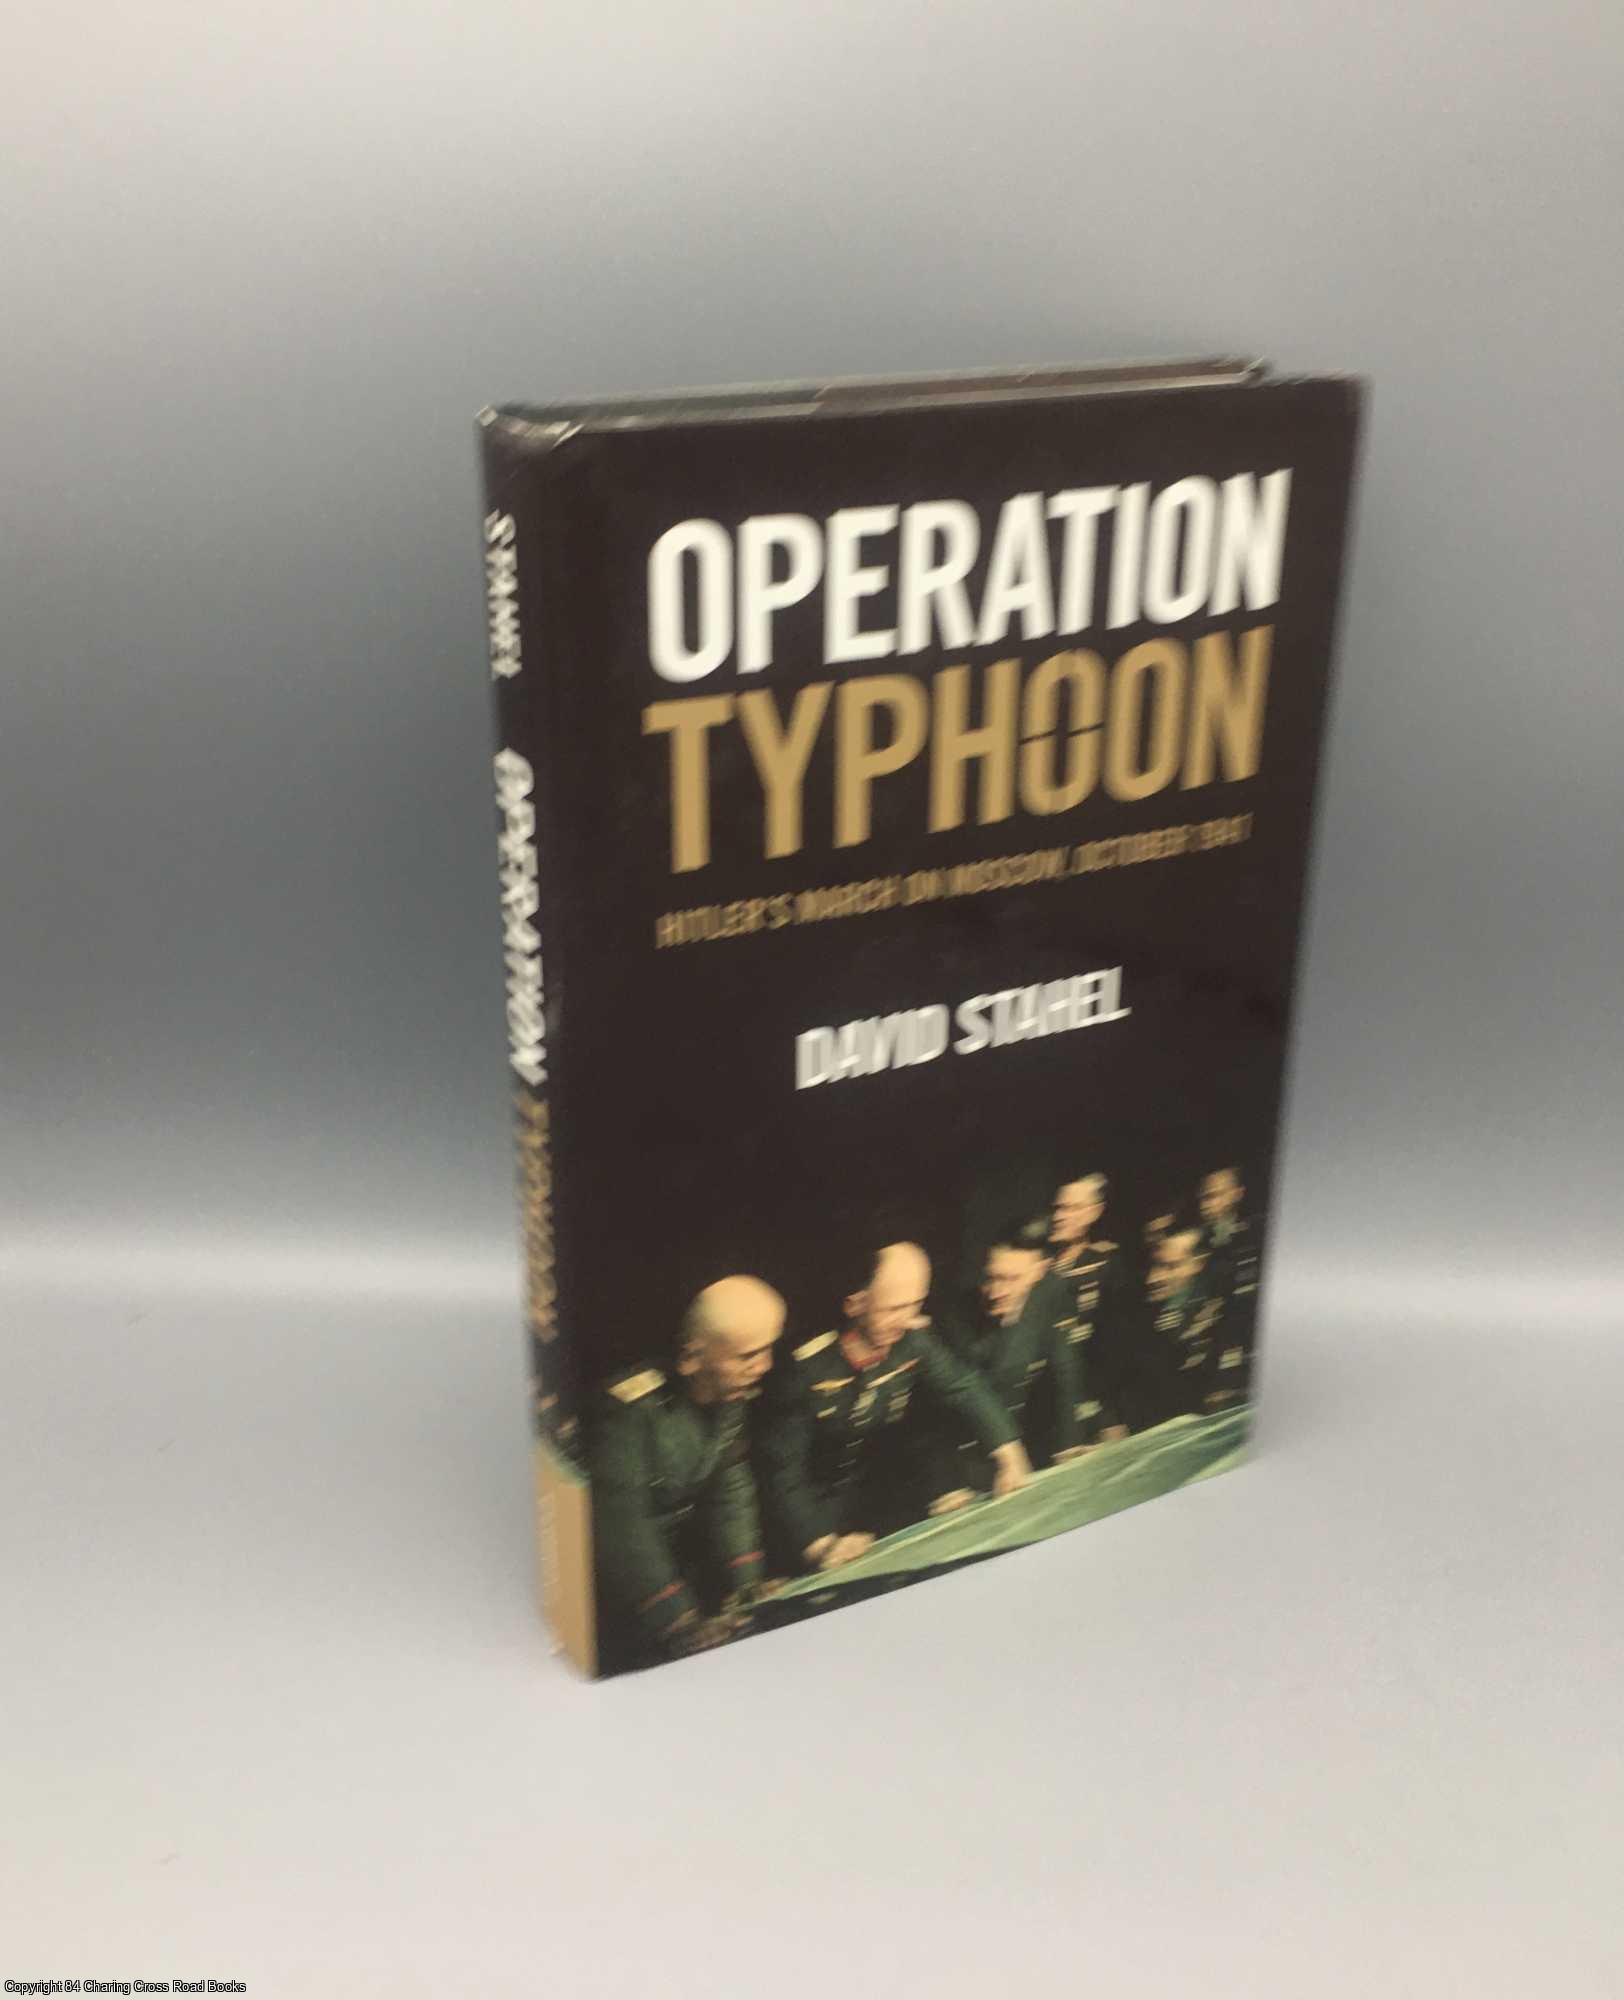 Stahel, David - Operation Typhoon: Hitler's March on Moscow, October 1941